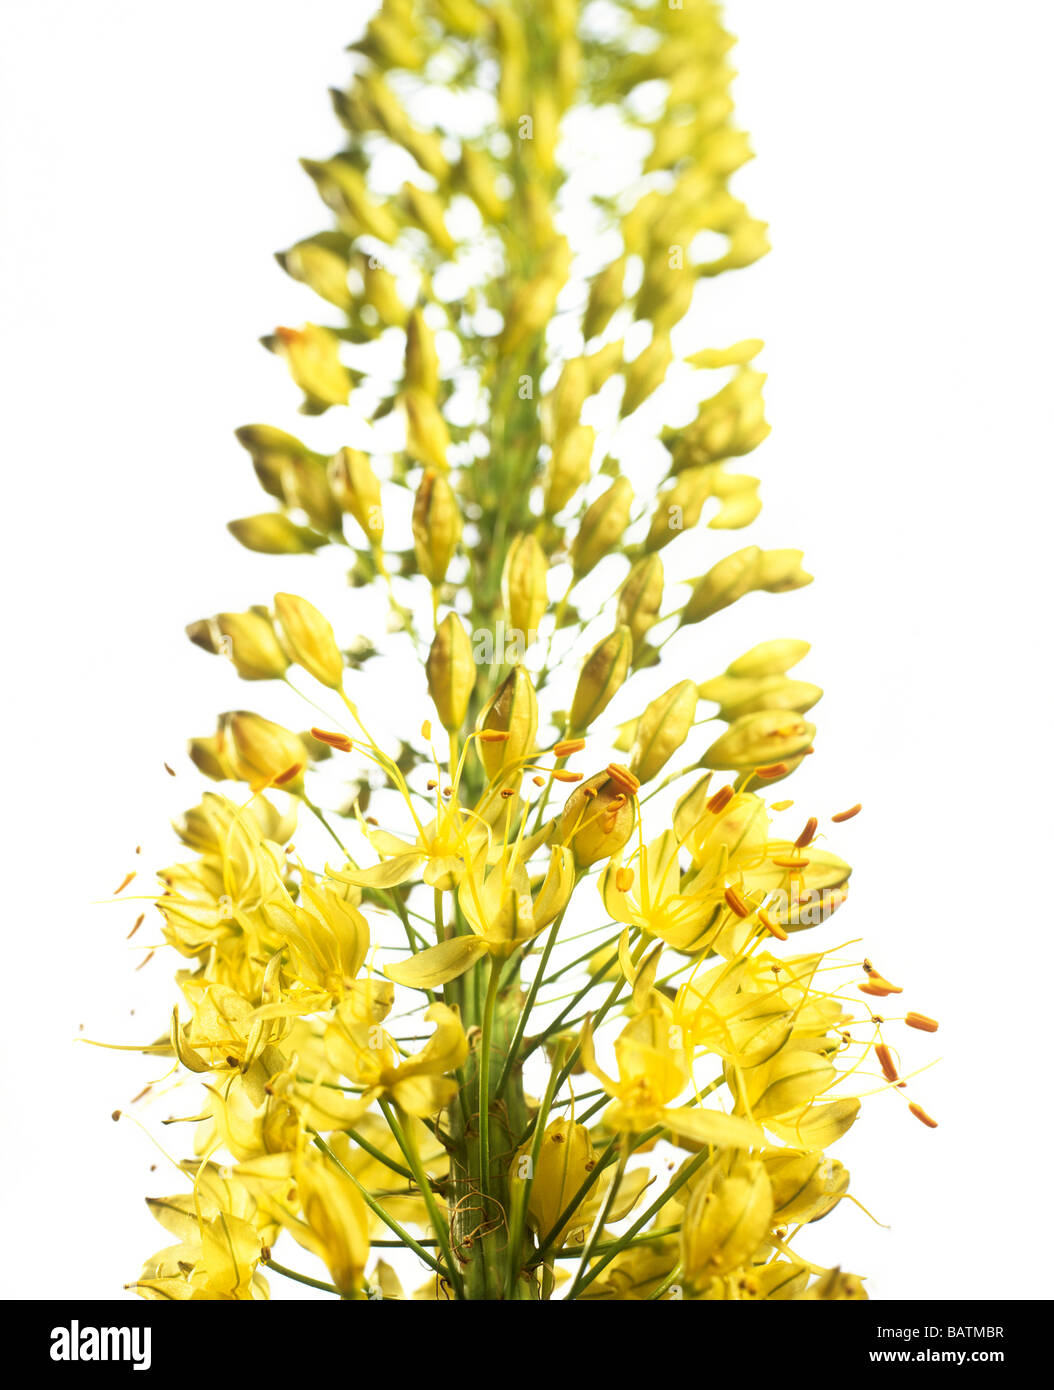 Foxtail lily (Eremurus bungei) spike with flowers. Stock Photo